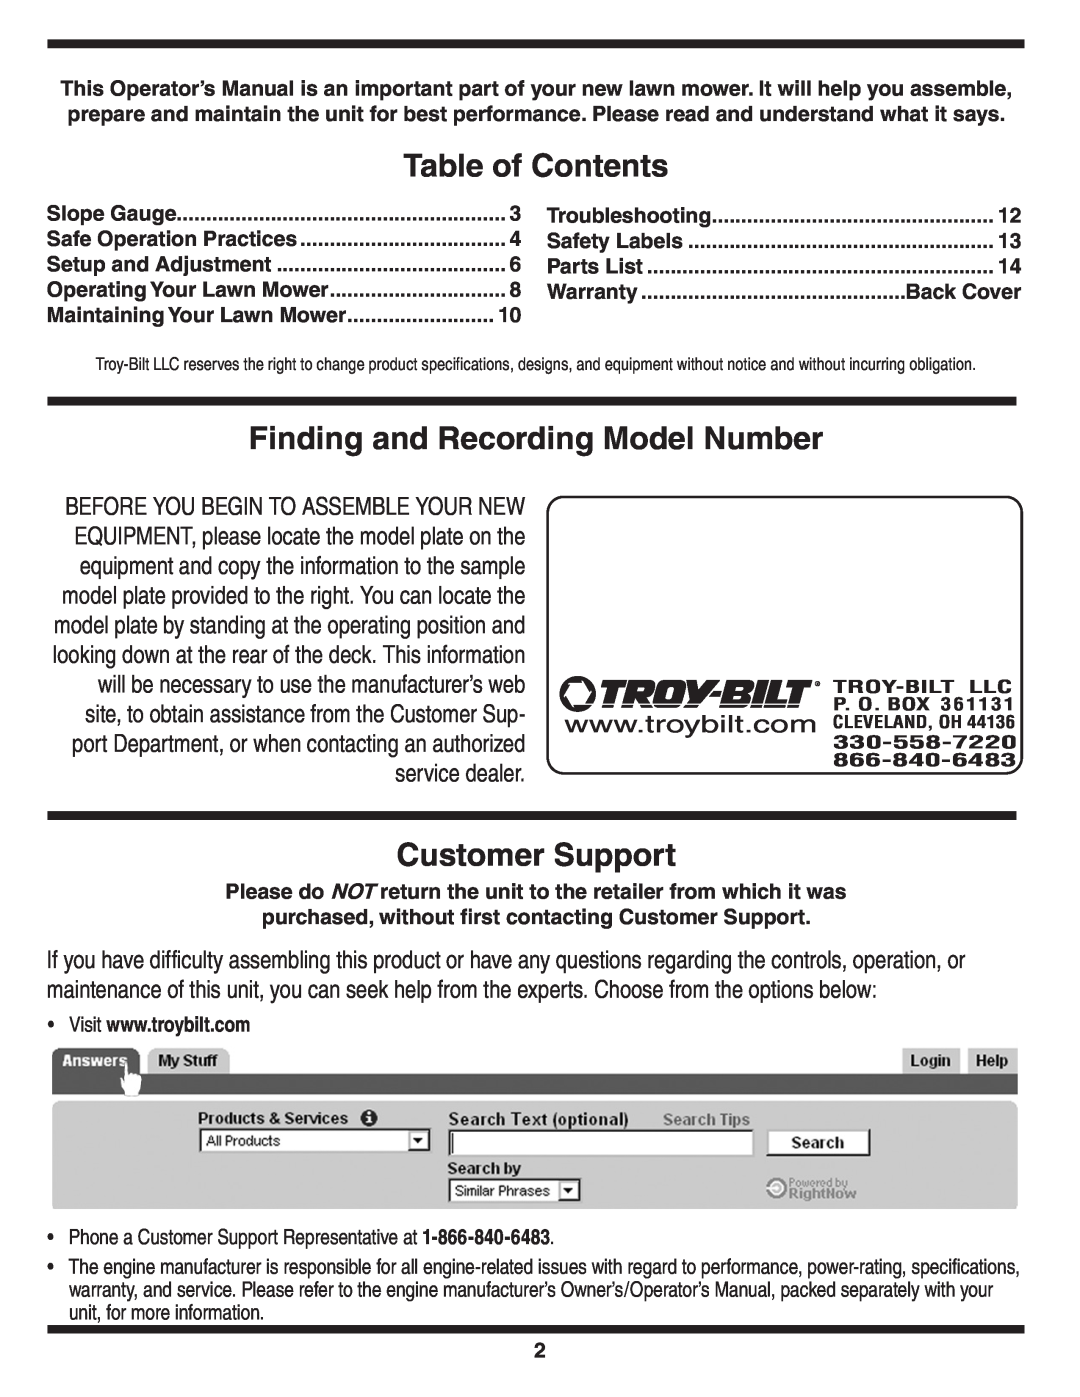 Troy-Bilt 420 warranty Table of Contents, Finding and Recording Model Number, Customer Support, service dealer 